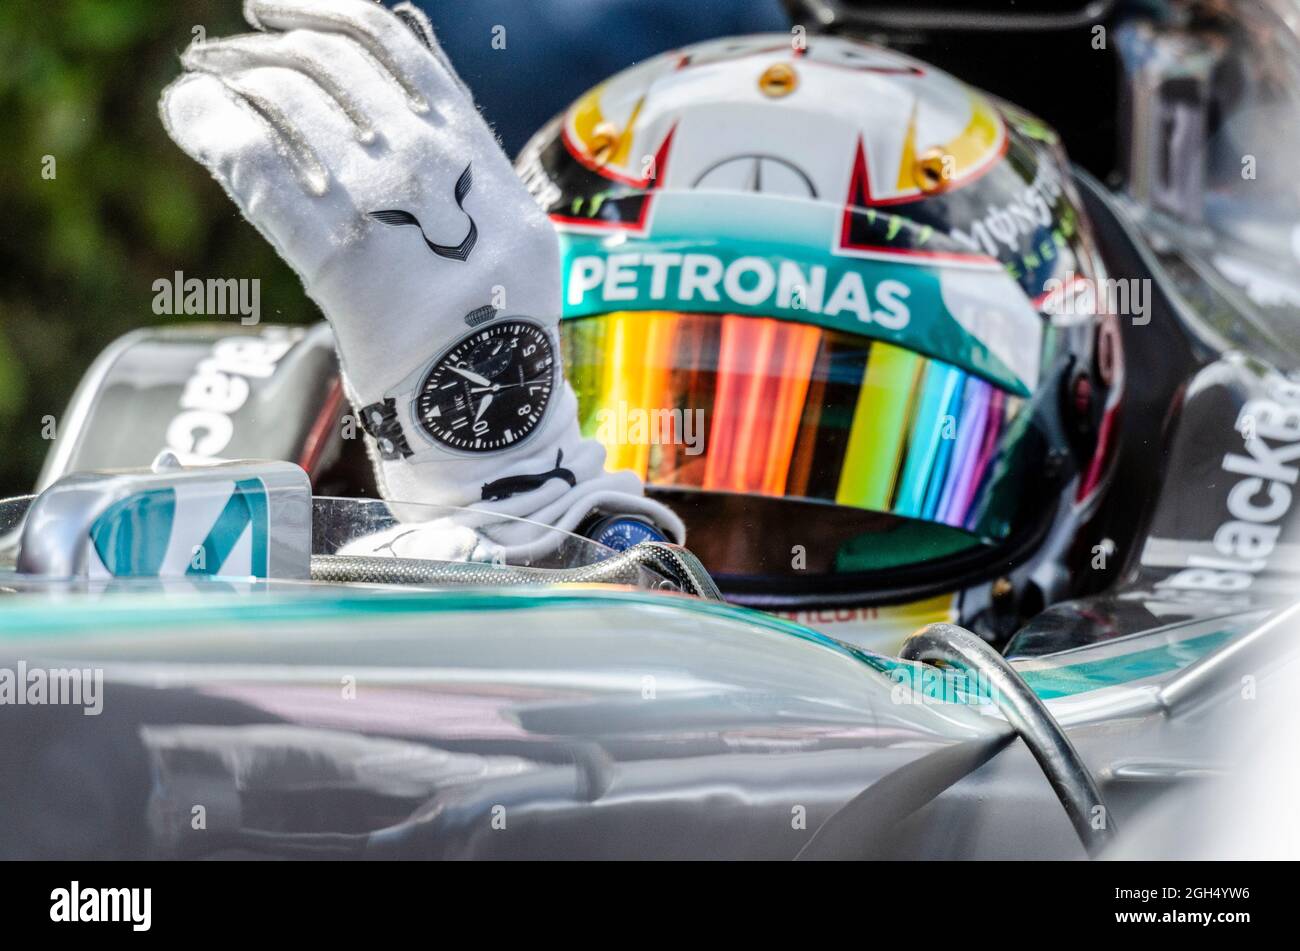 Lewis Hamilton, Mercedes Formula 1 Grand Prix racing driver in the cockpit  of Petronas Mercedes F1 car at Goodwood. IWC Schaffhausen watch printed  Stock Photo - Alamy